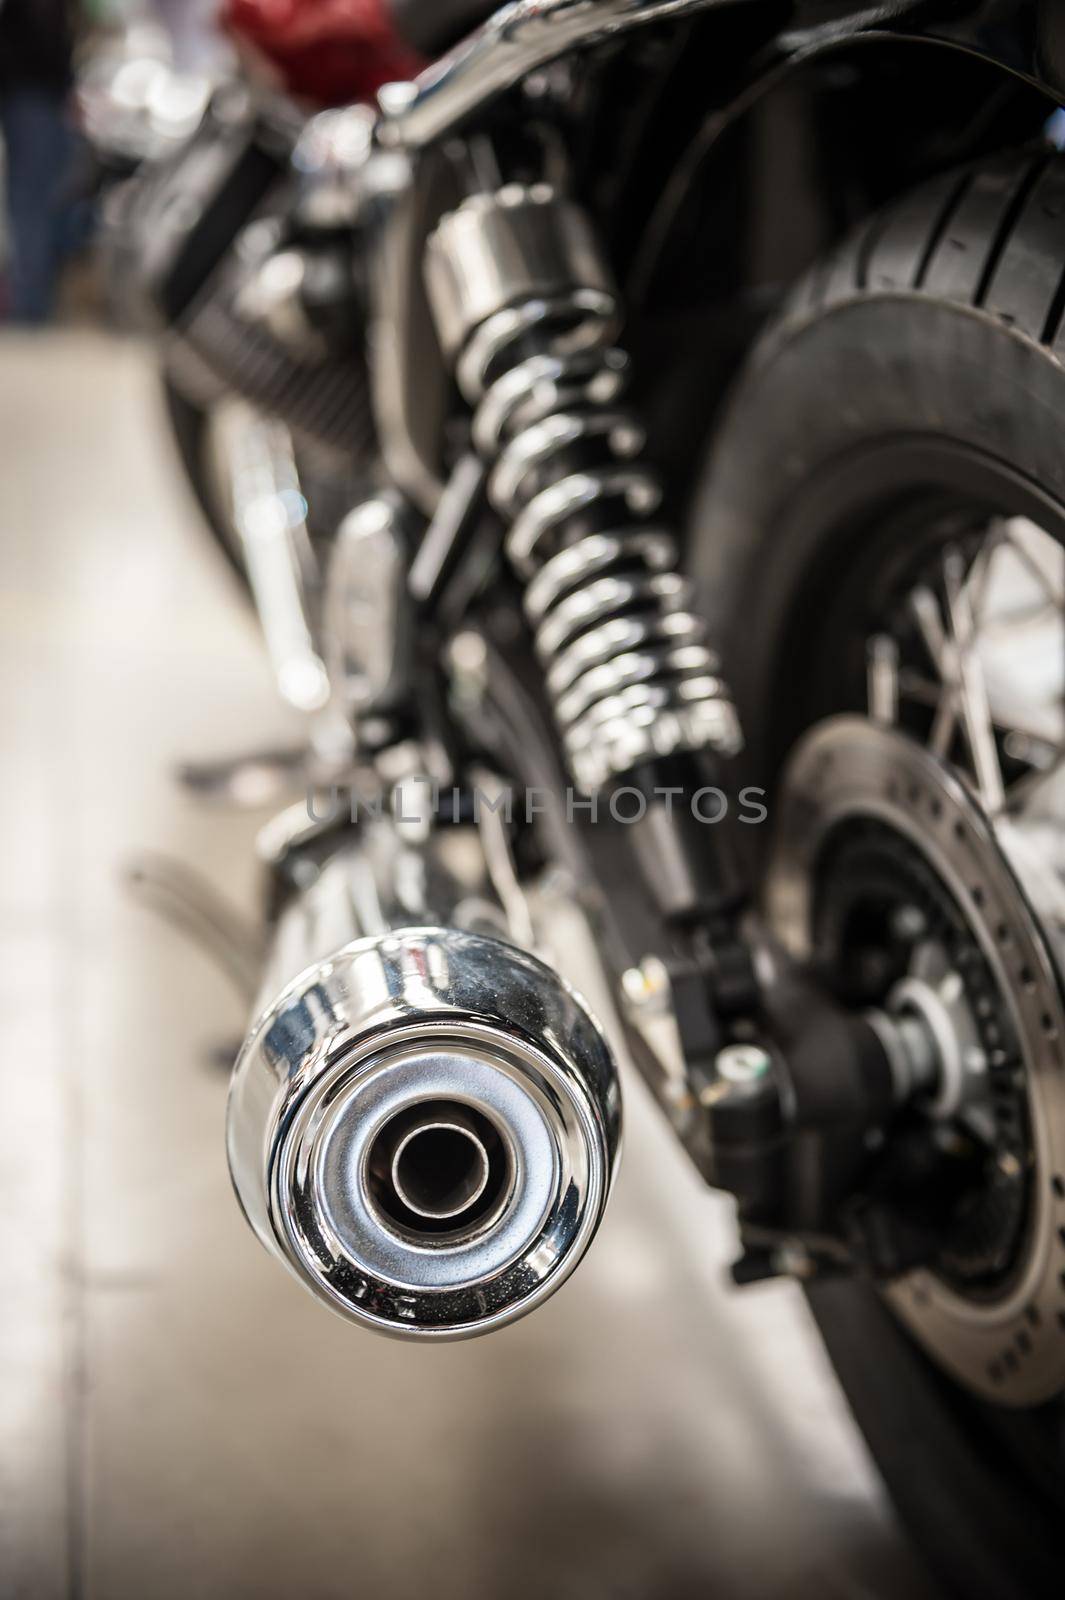 Motorcycle exhaust pipe by cla78